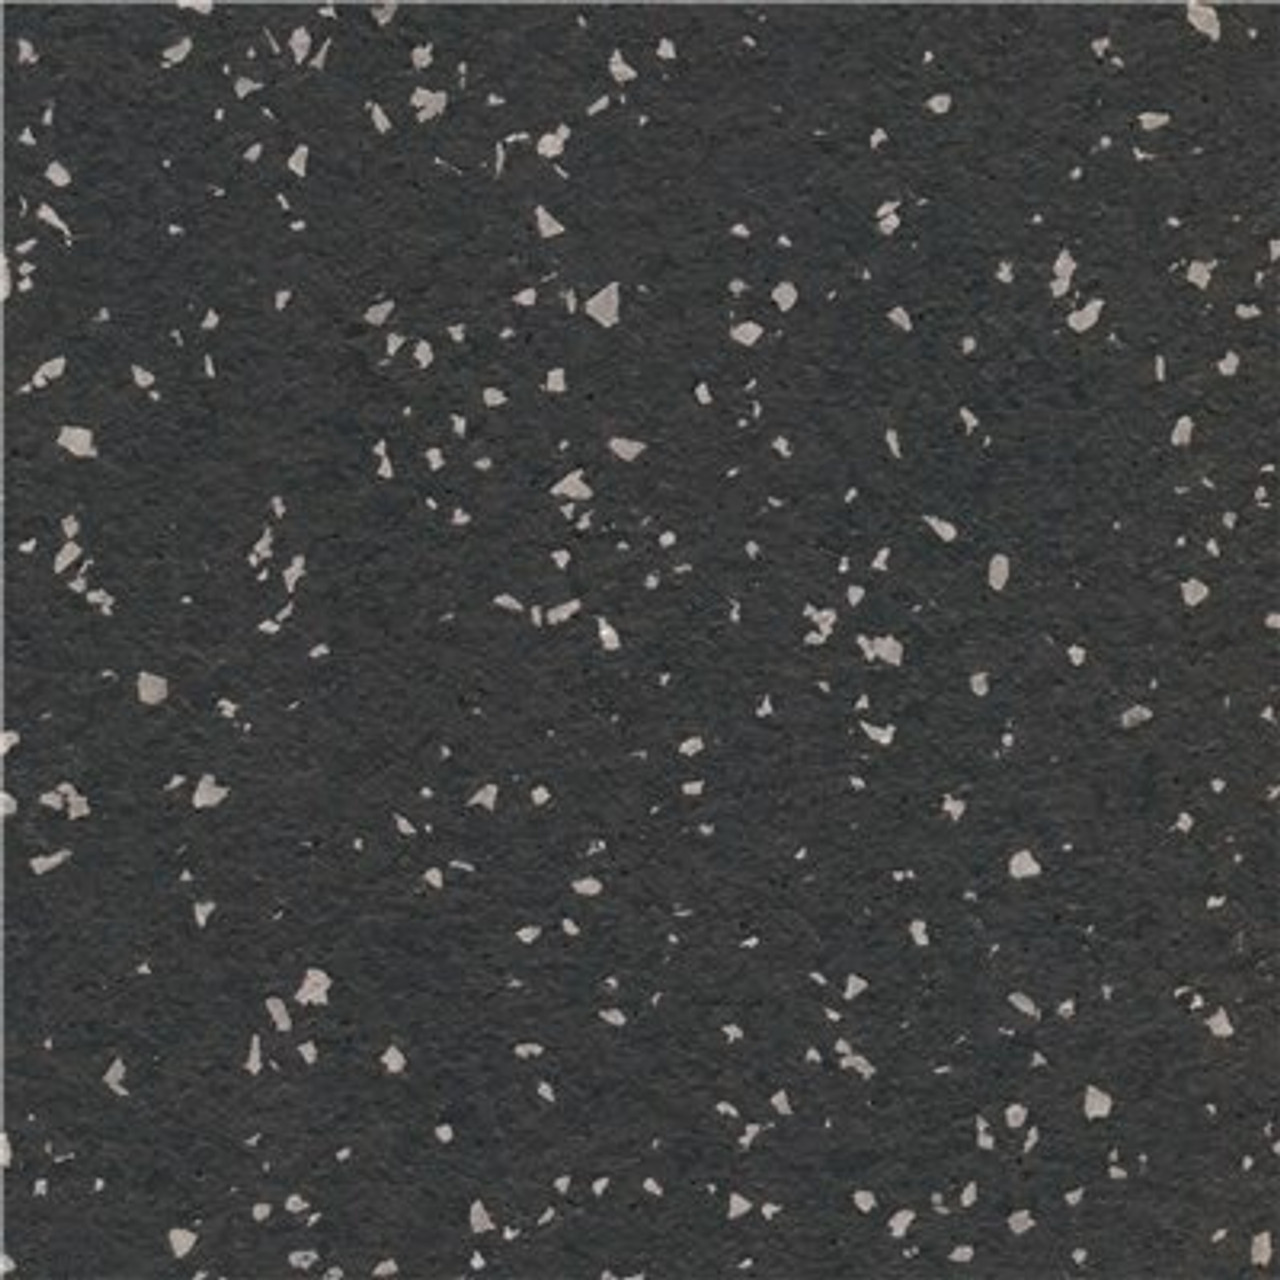 Rubber King Pro Series Grey-Ddg 8 Mm 38 In. W X 38 In. L Square Rubber Tile (970 Sq. Ft.)